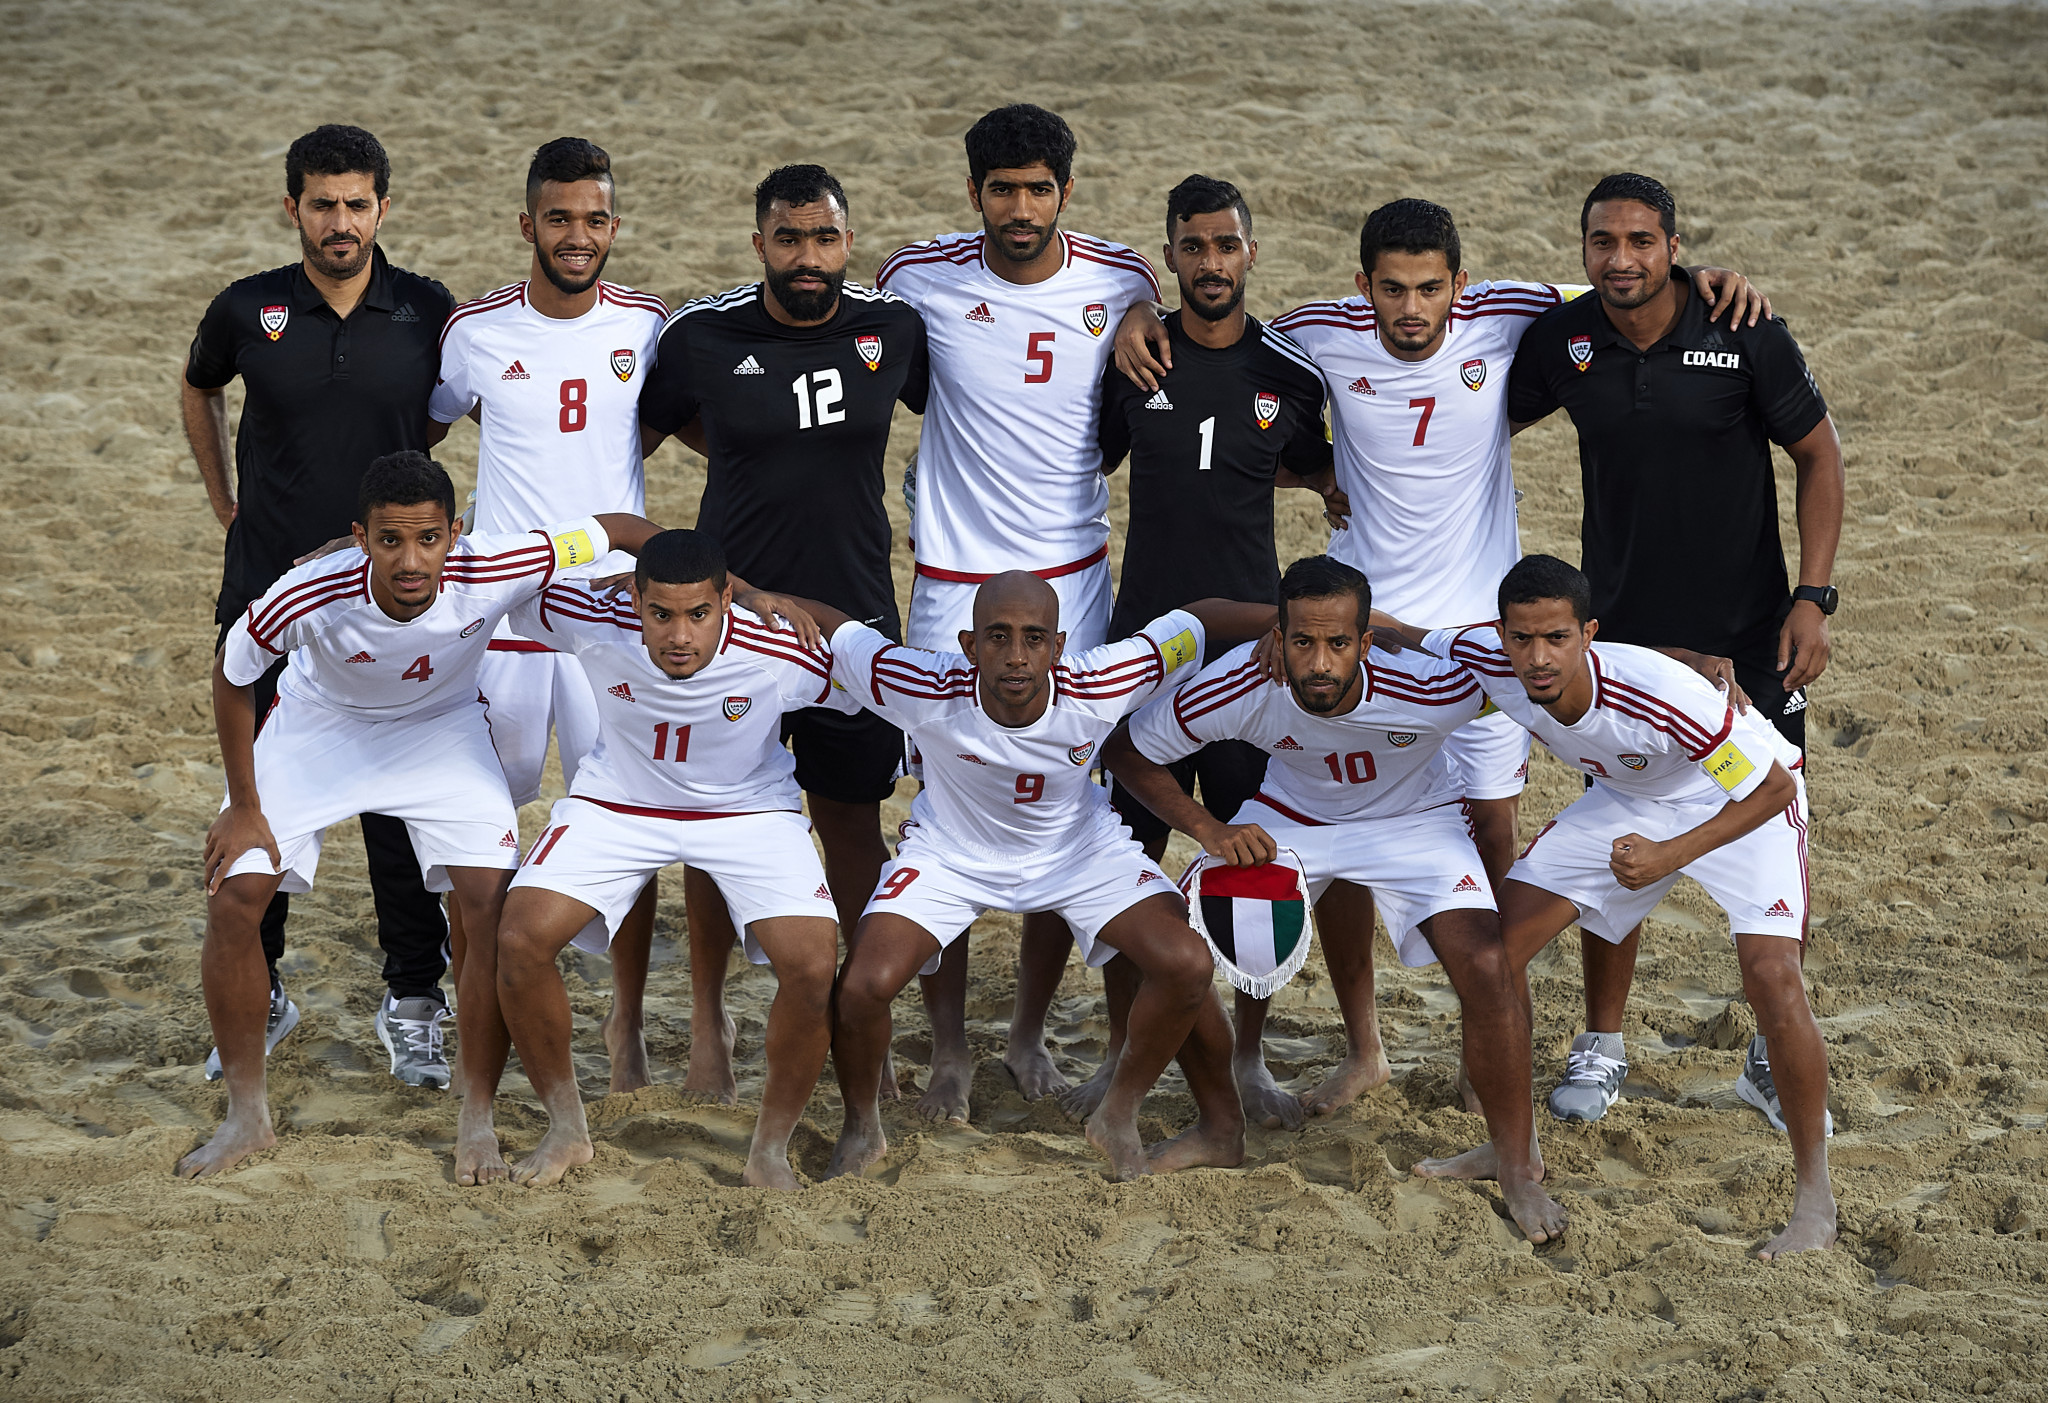 Hosts UAE face tough draw at Intercontinental Beach Soccer Cup